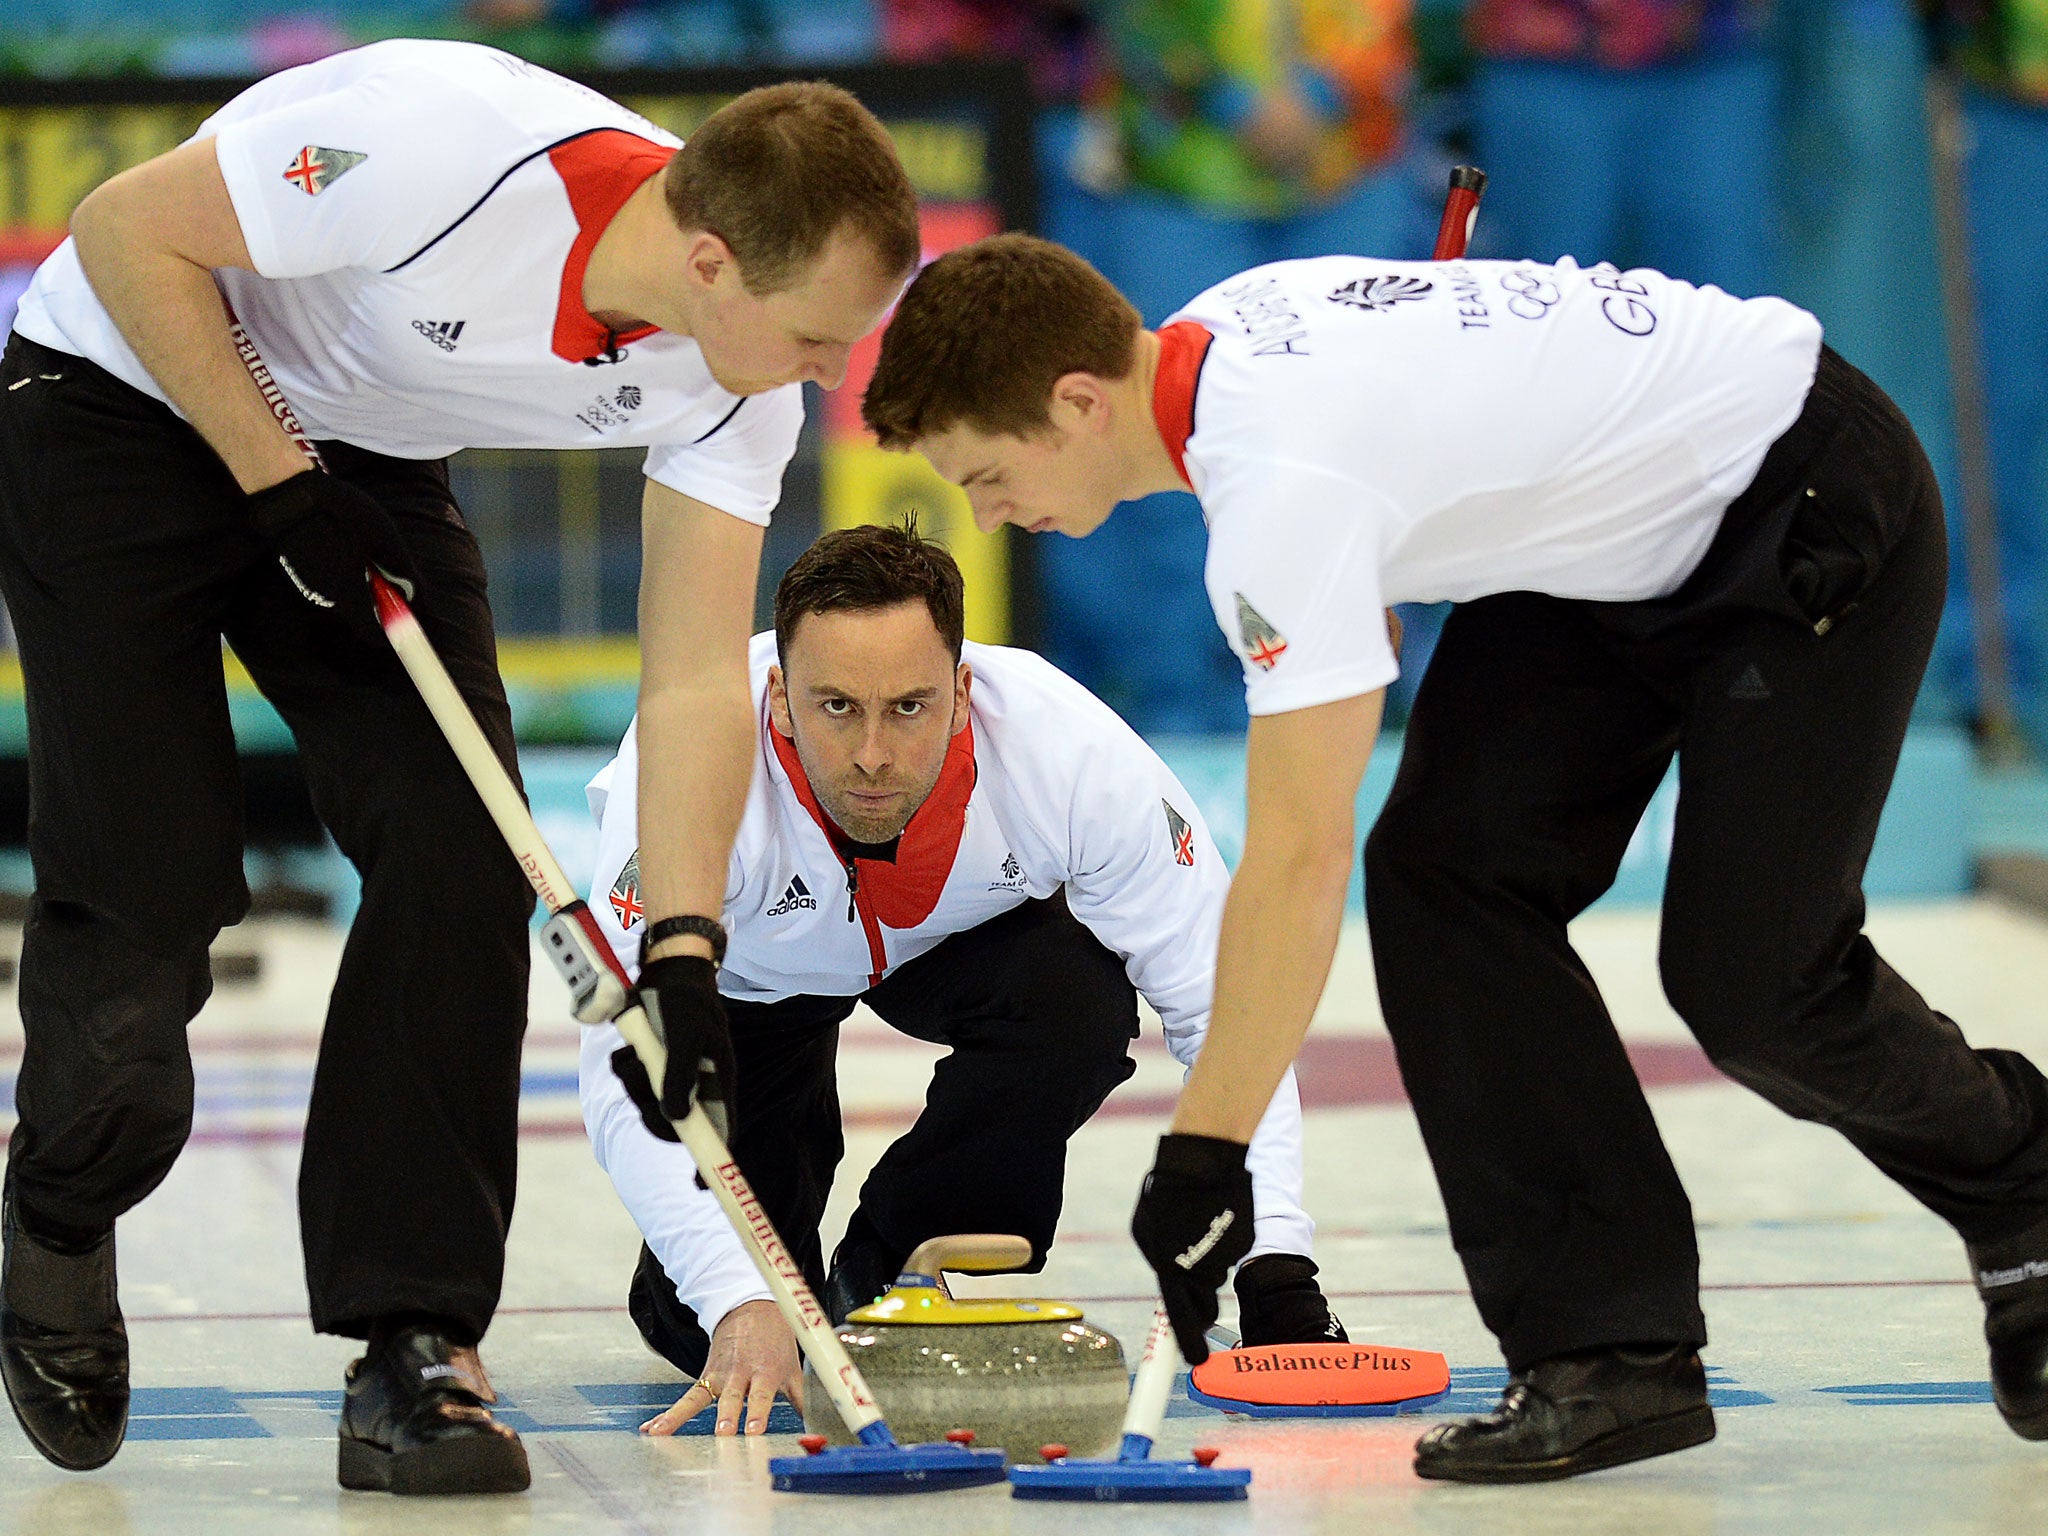 Winter Olympics 2014: Great Britain men's curling team the comeback